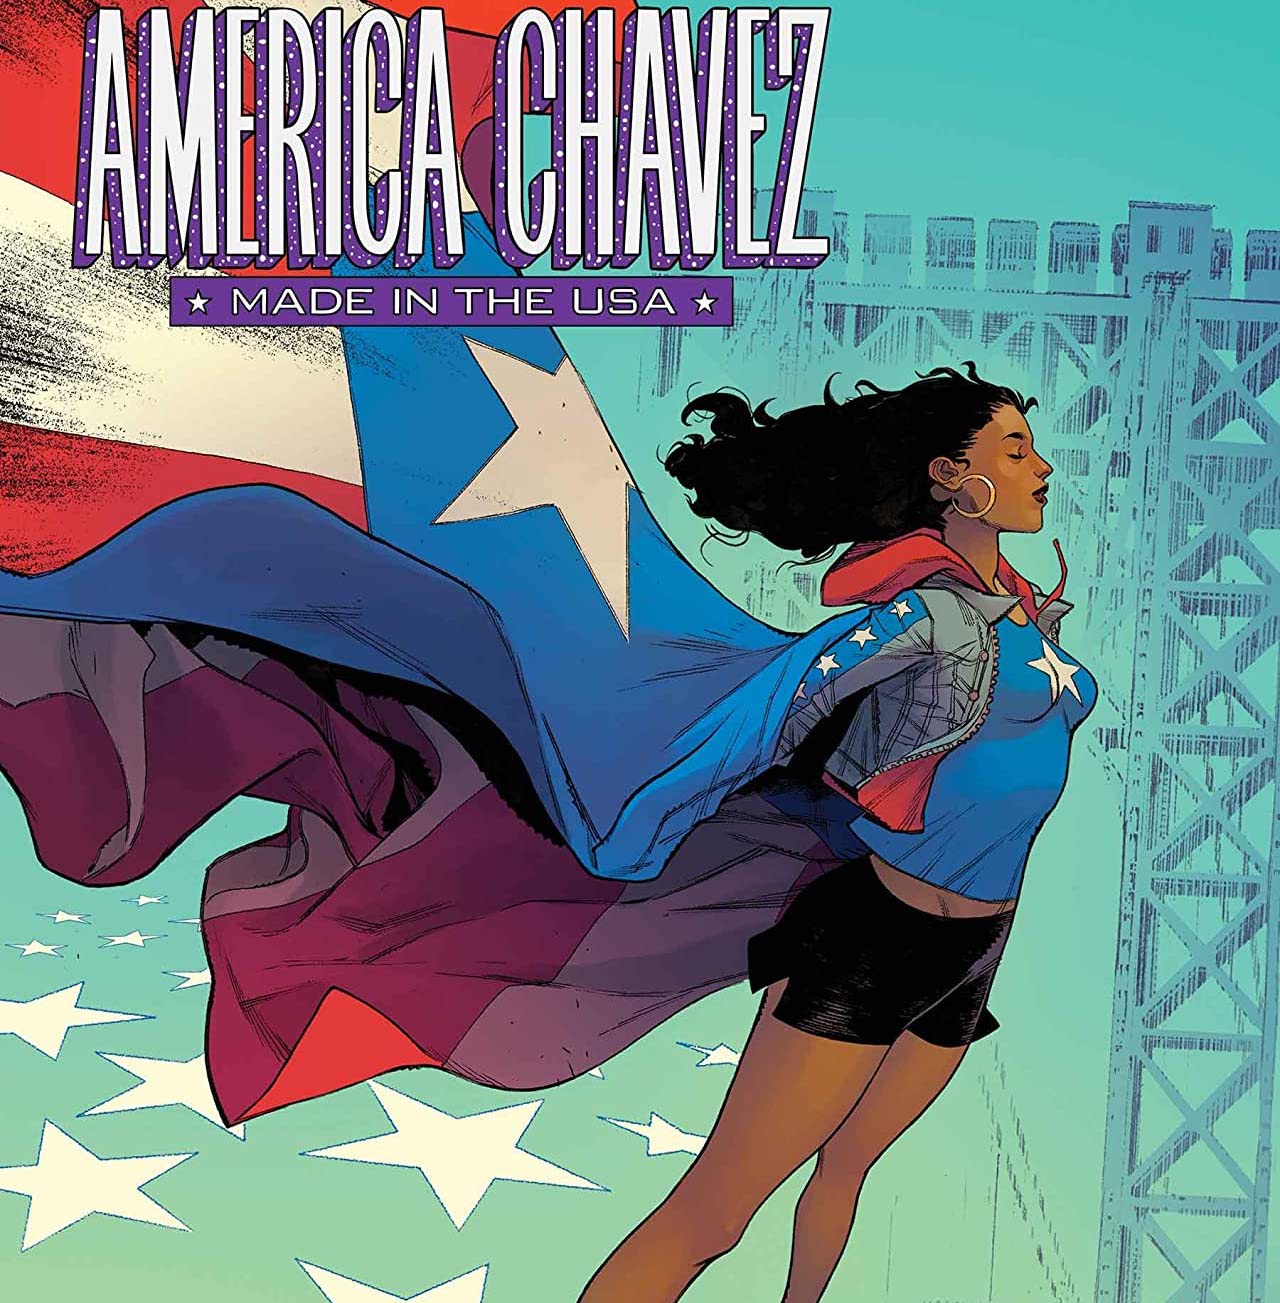 'America Chavez: Made in the USA' #2 plays up the complicated origin of its character